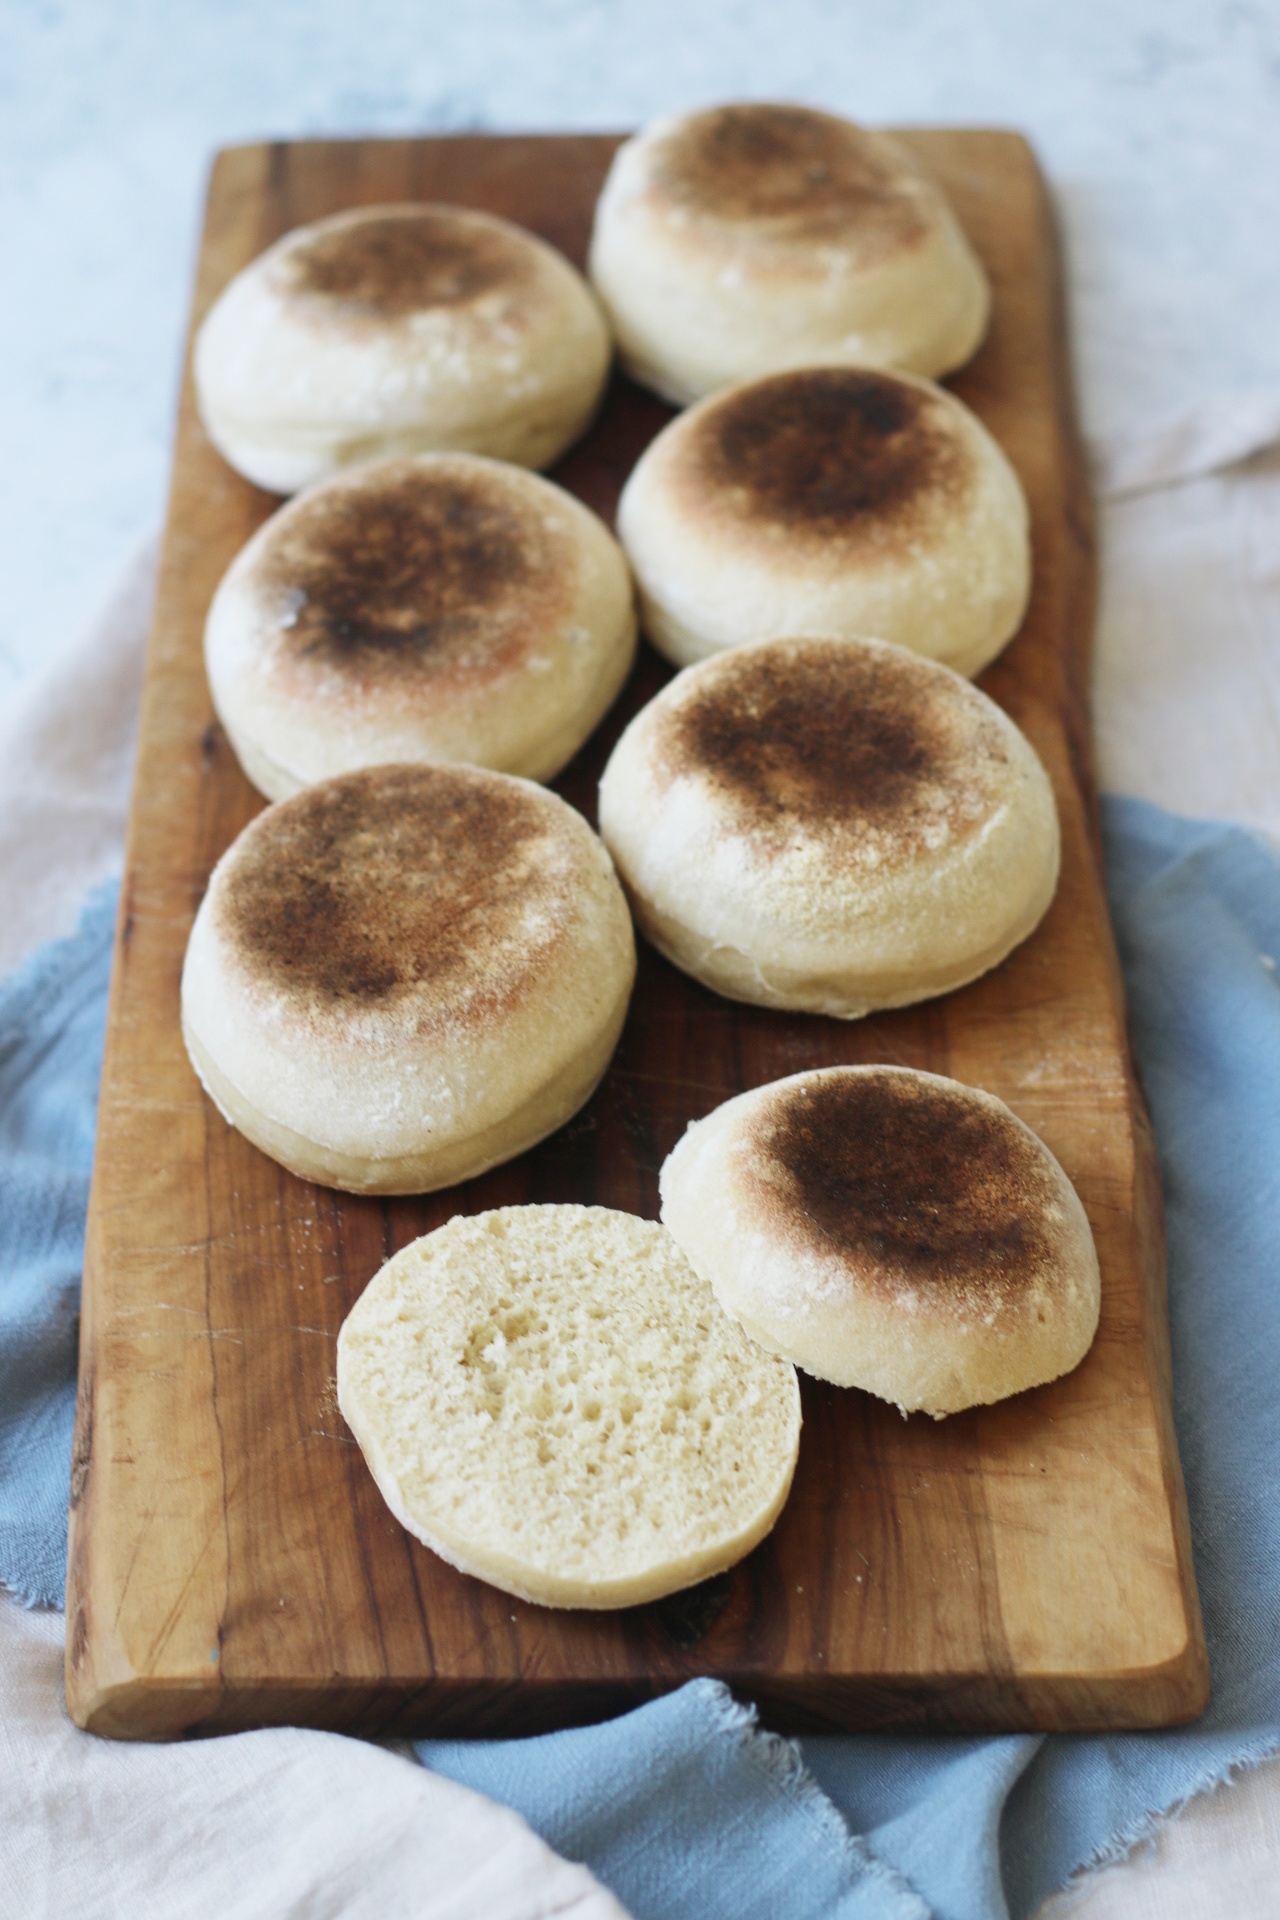 Toasted English Muffins cut open